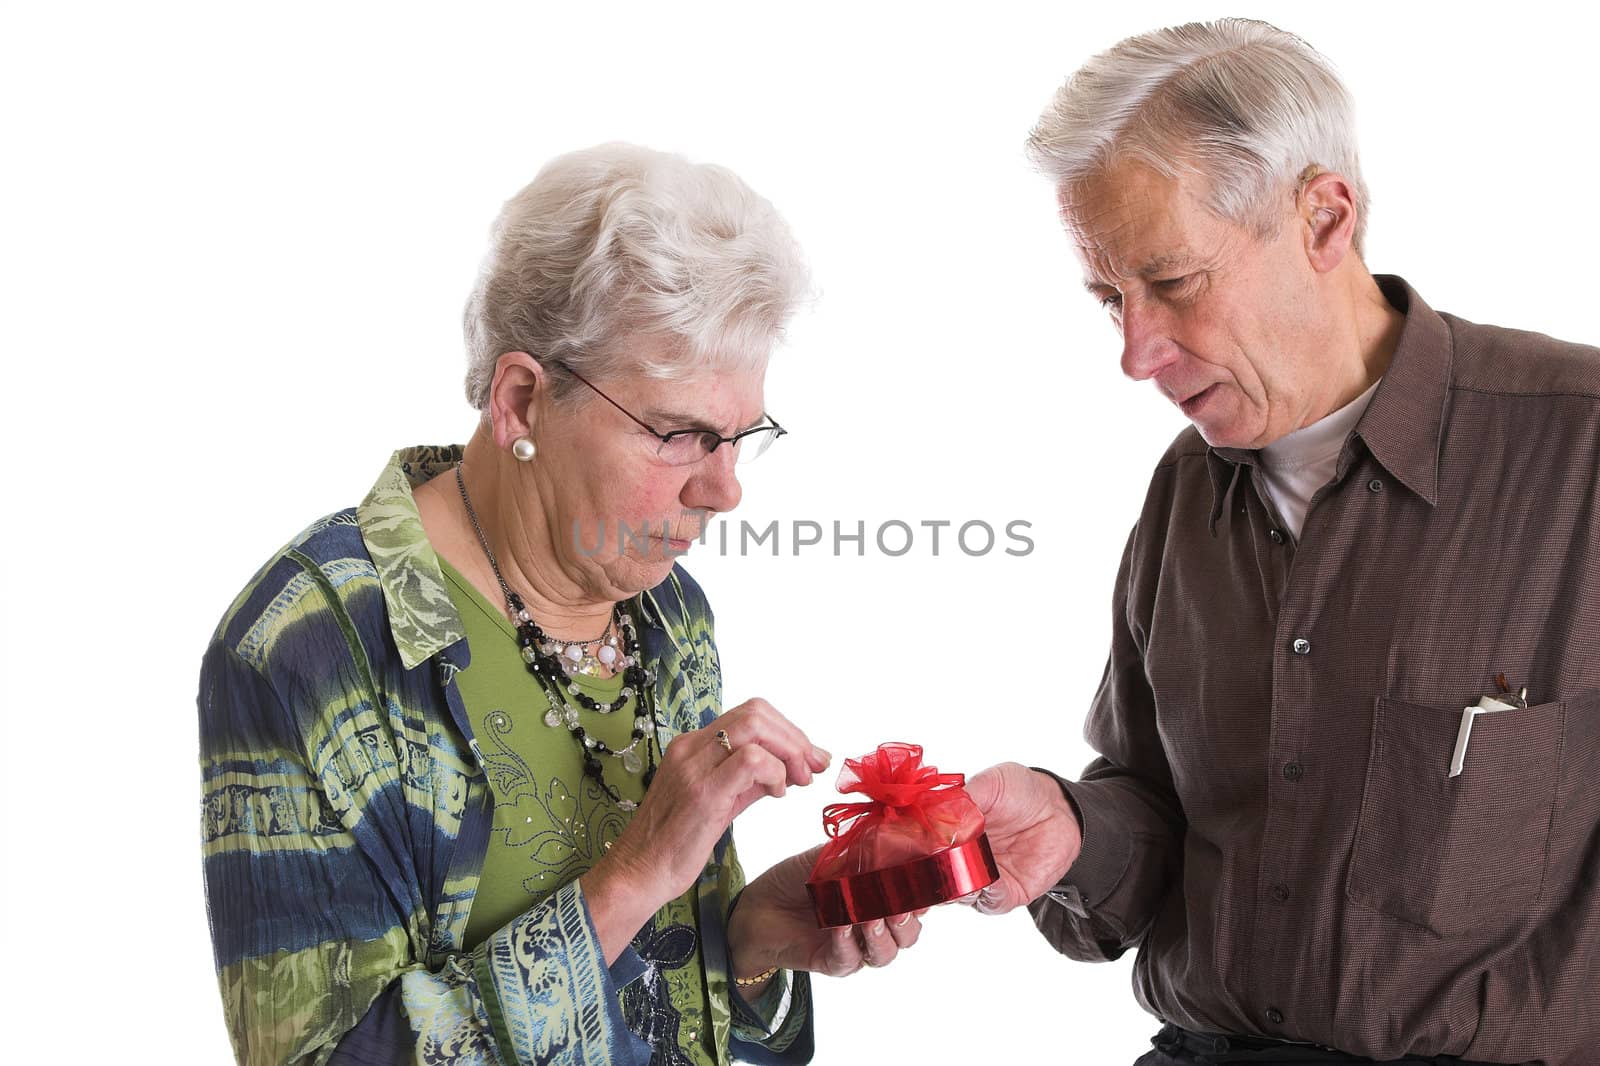 Man helping his wife opening the little strings of the chocolate present he has given her for valentine